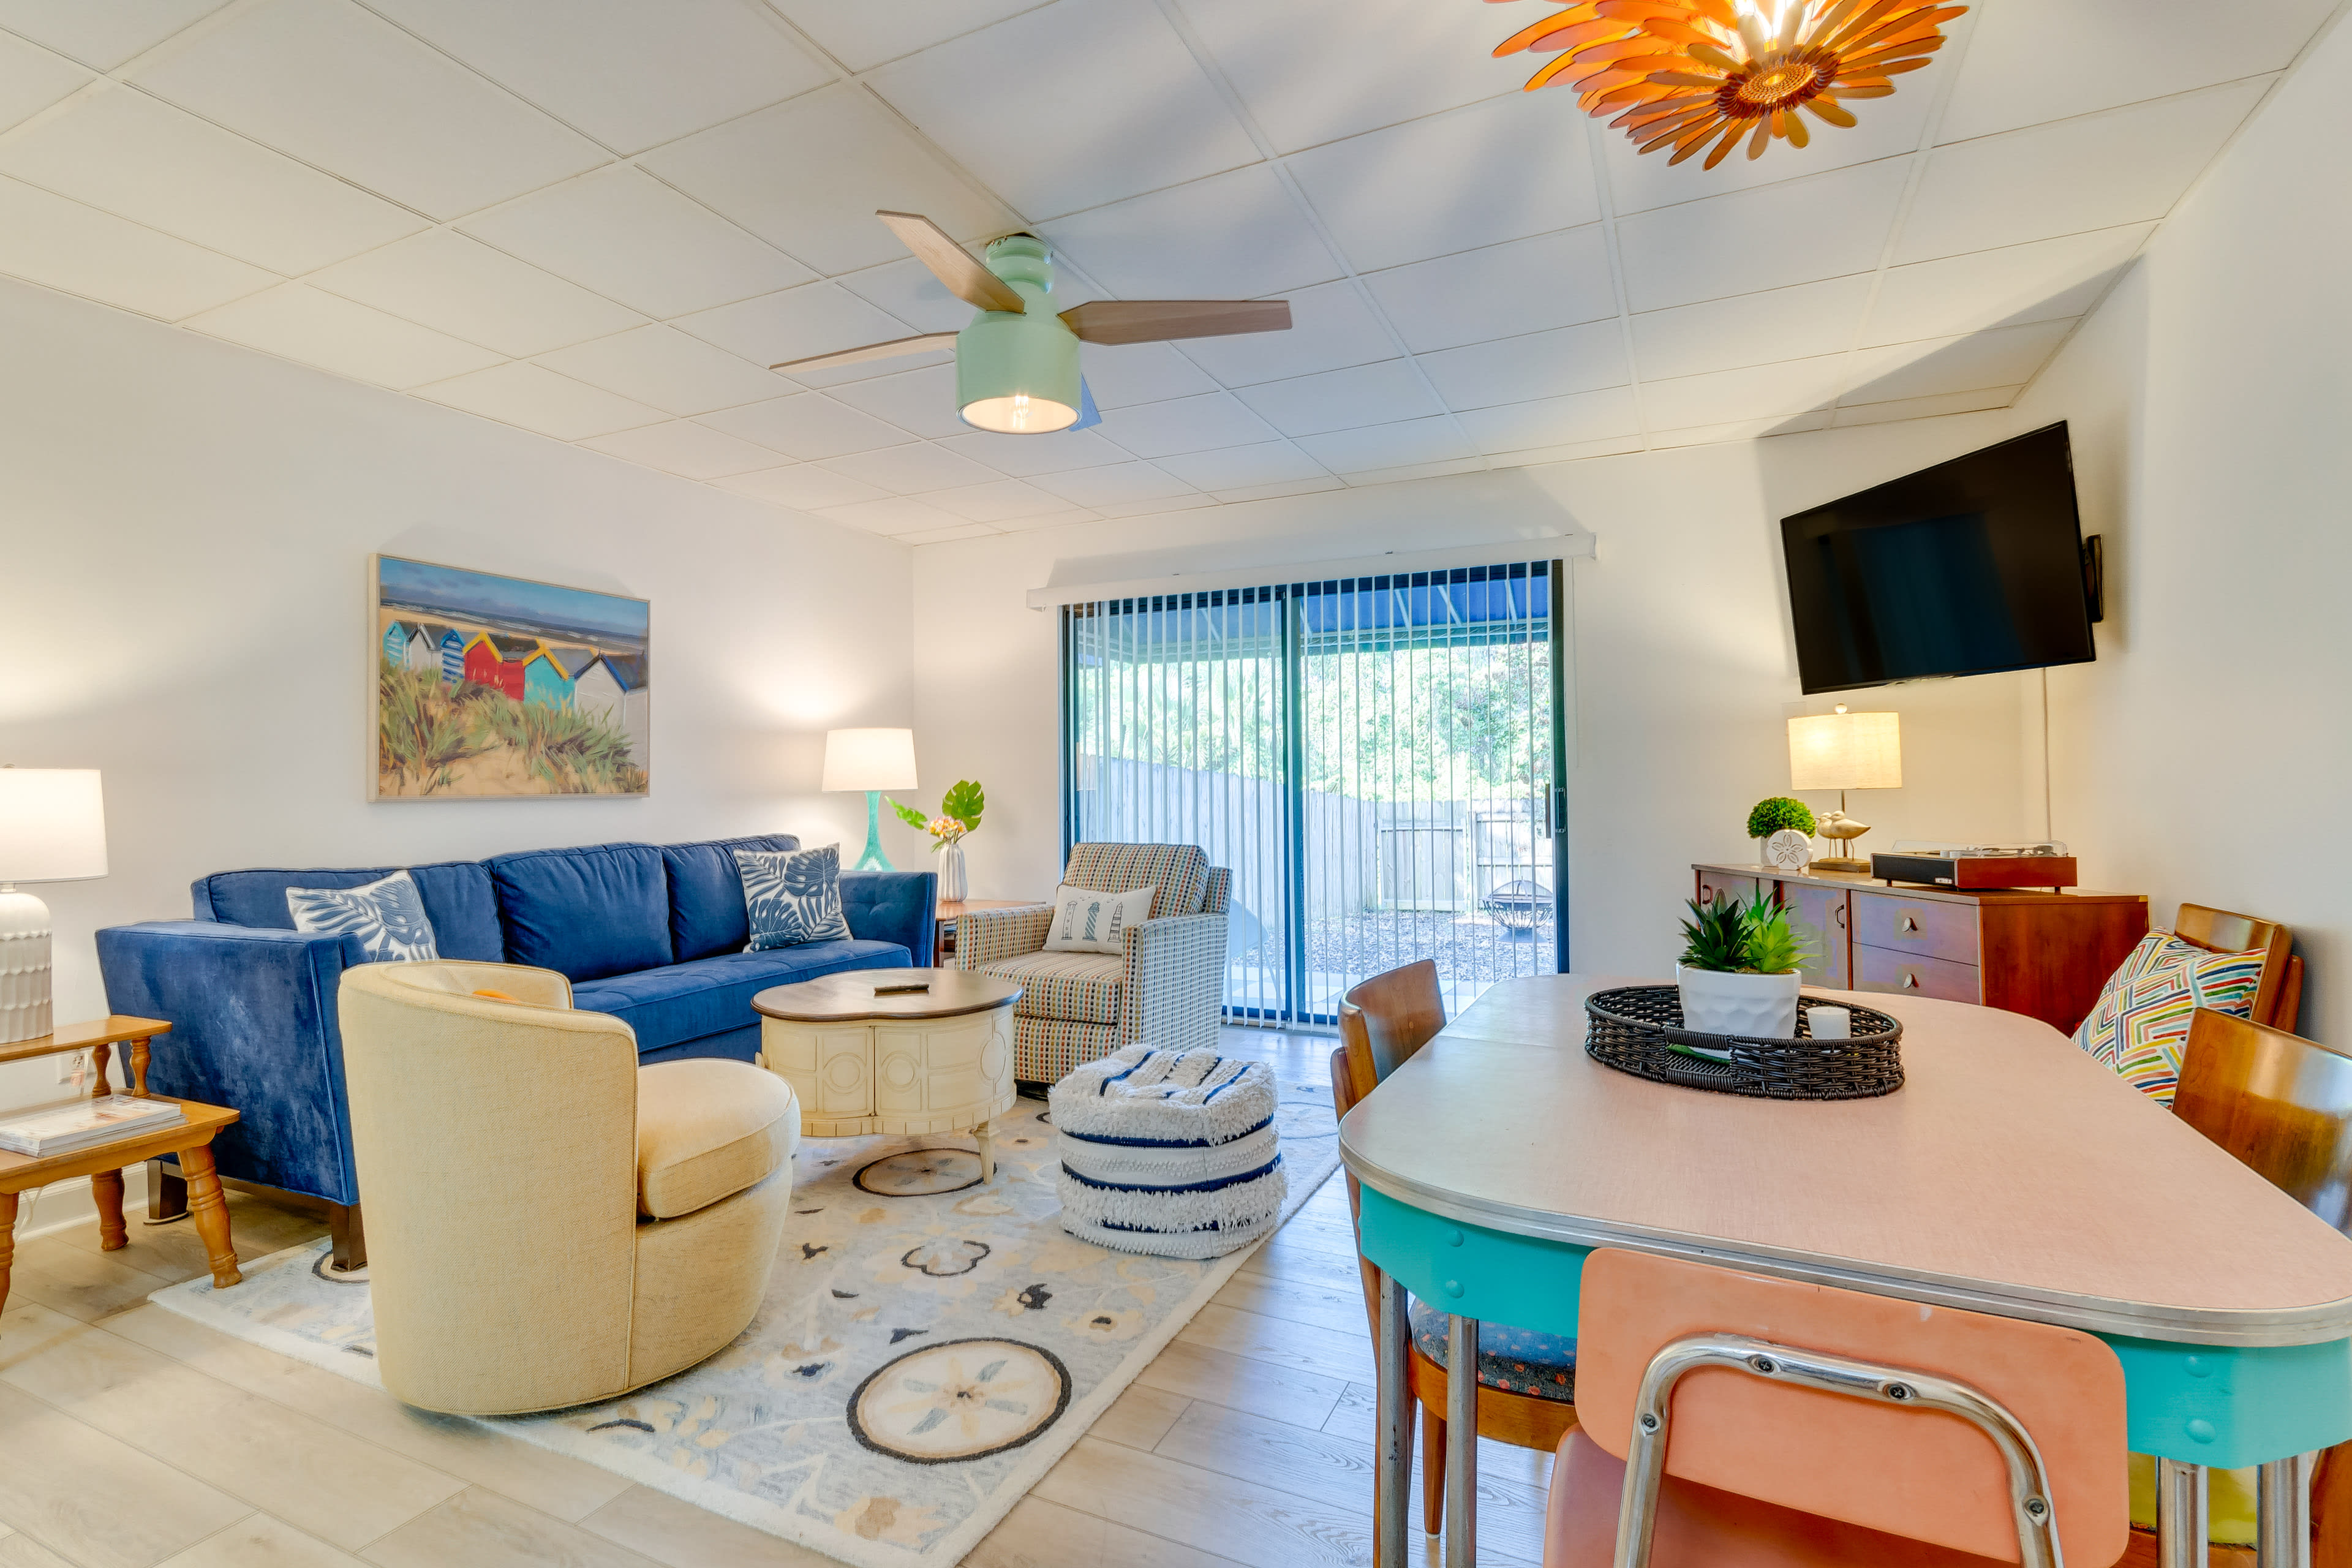 Gulf Breeze Vacation Rental | 1,009 Sq Ft | 2BR | 1.5BA | Step-Free Access